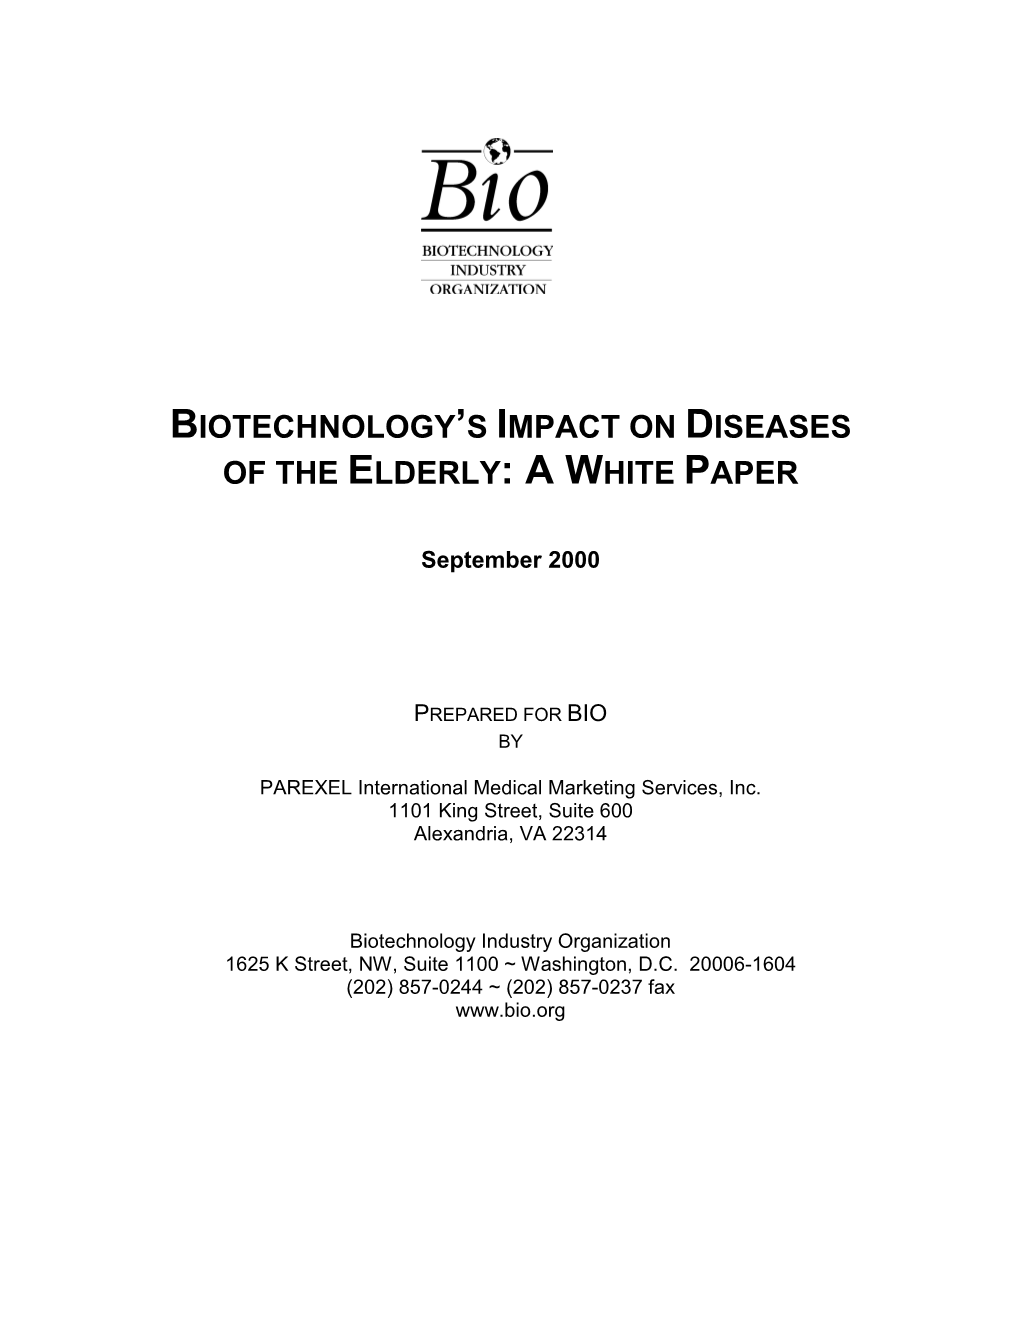 Biotechnology's Impact on Diseases